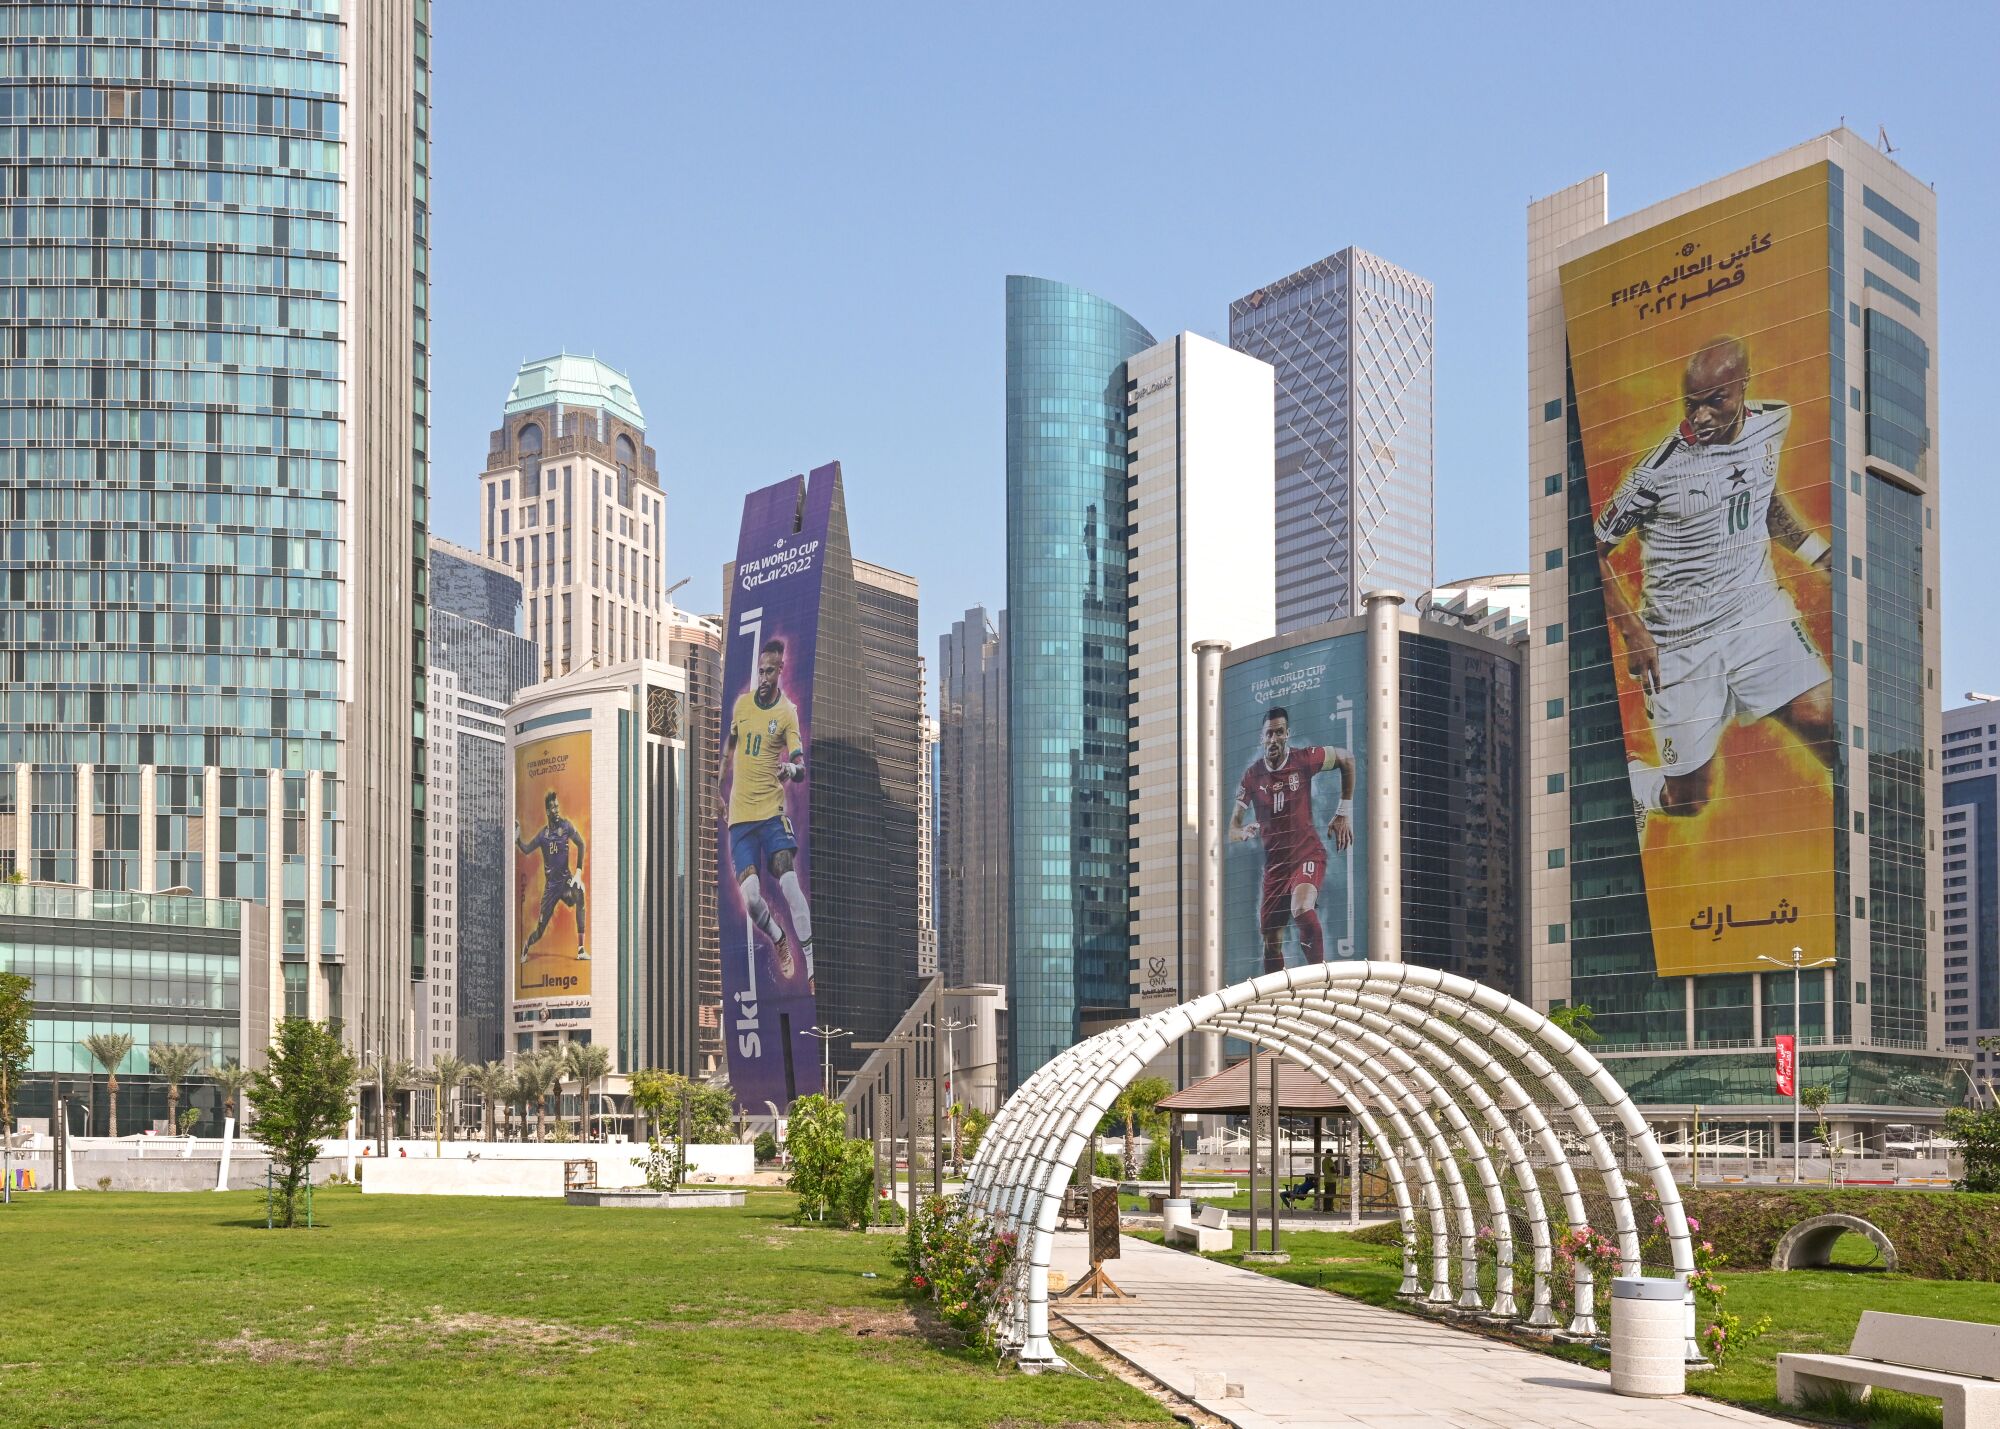 FIFA World Cup posters covering West Bay skyscrapers in Doha, Qatar.